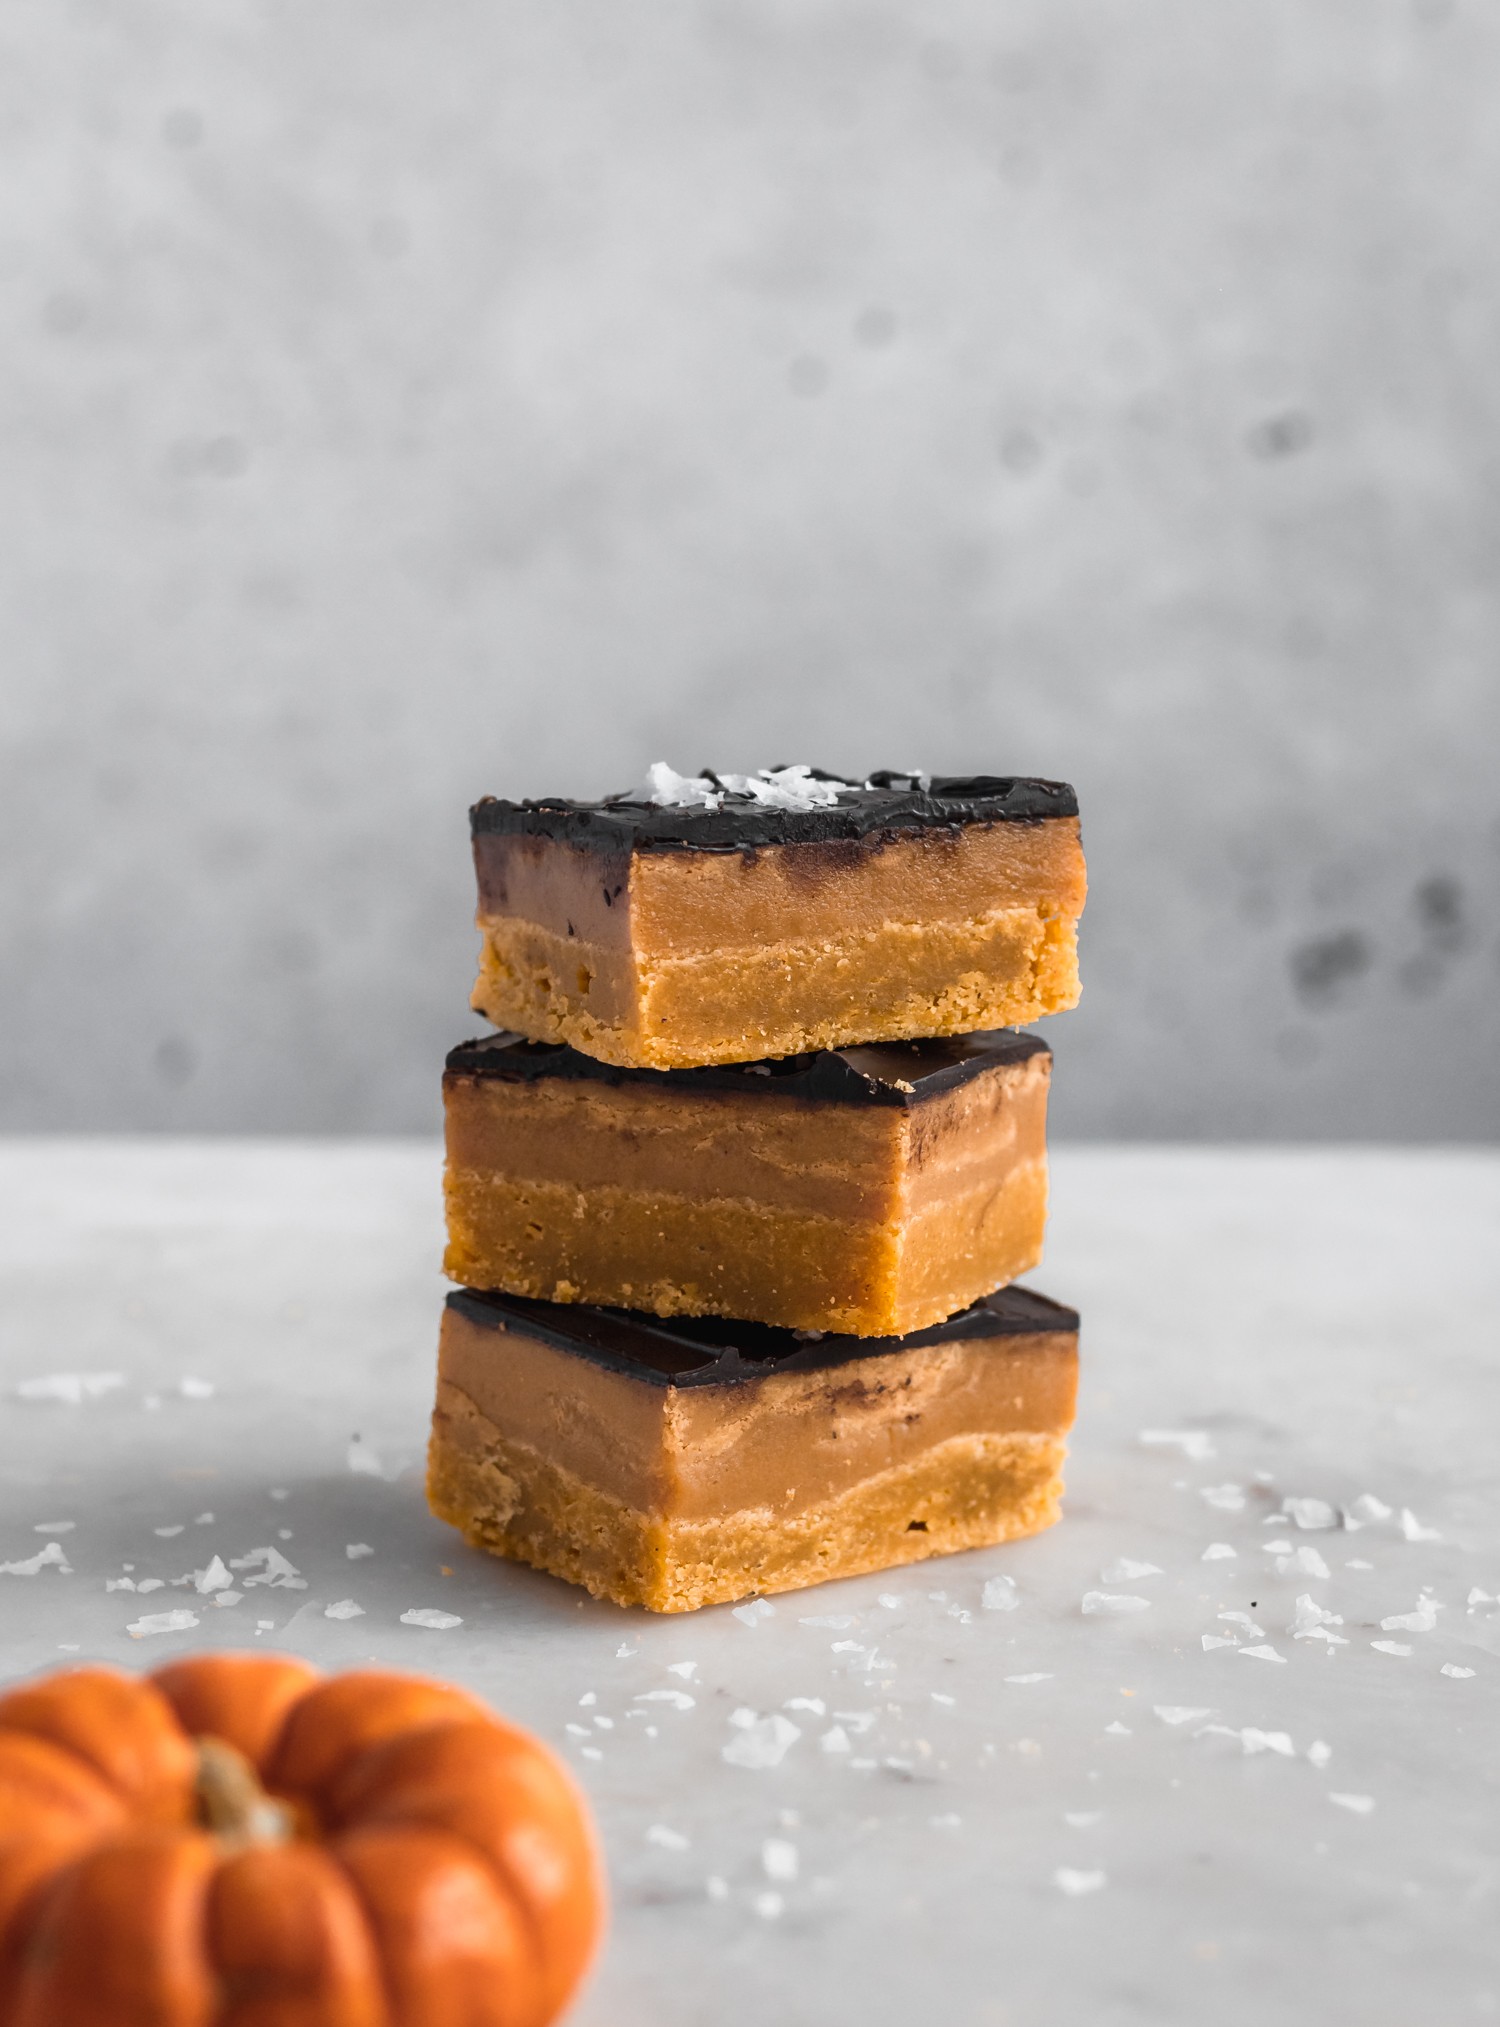 How to make pumpkin caramel with condensed milk.